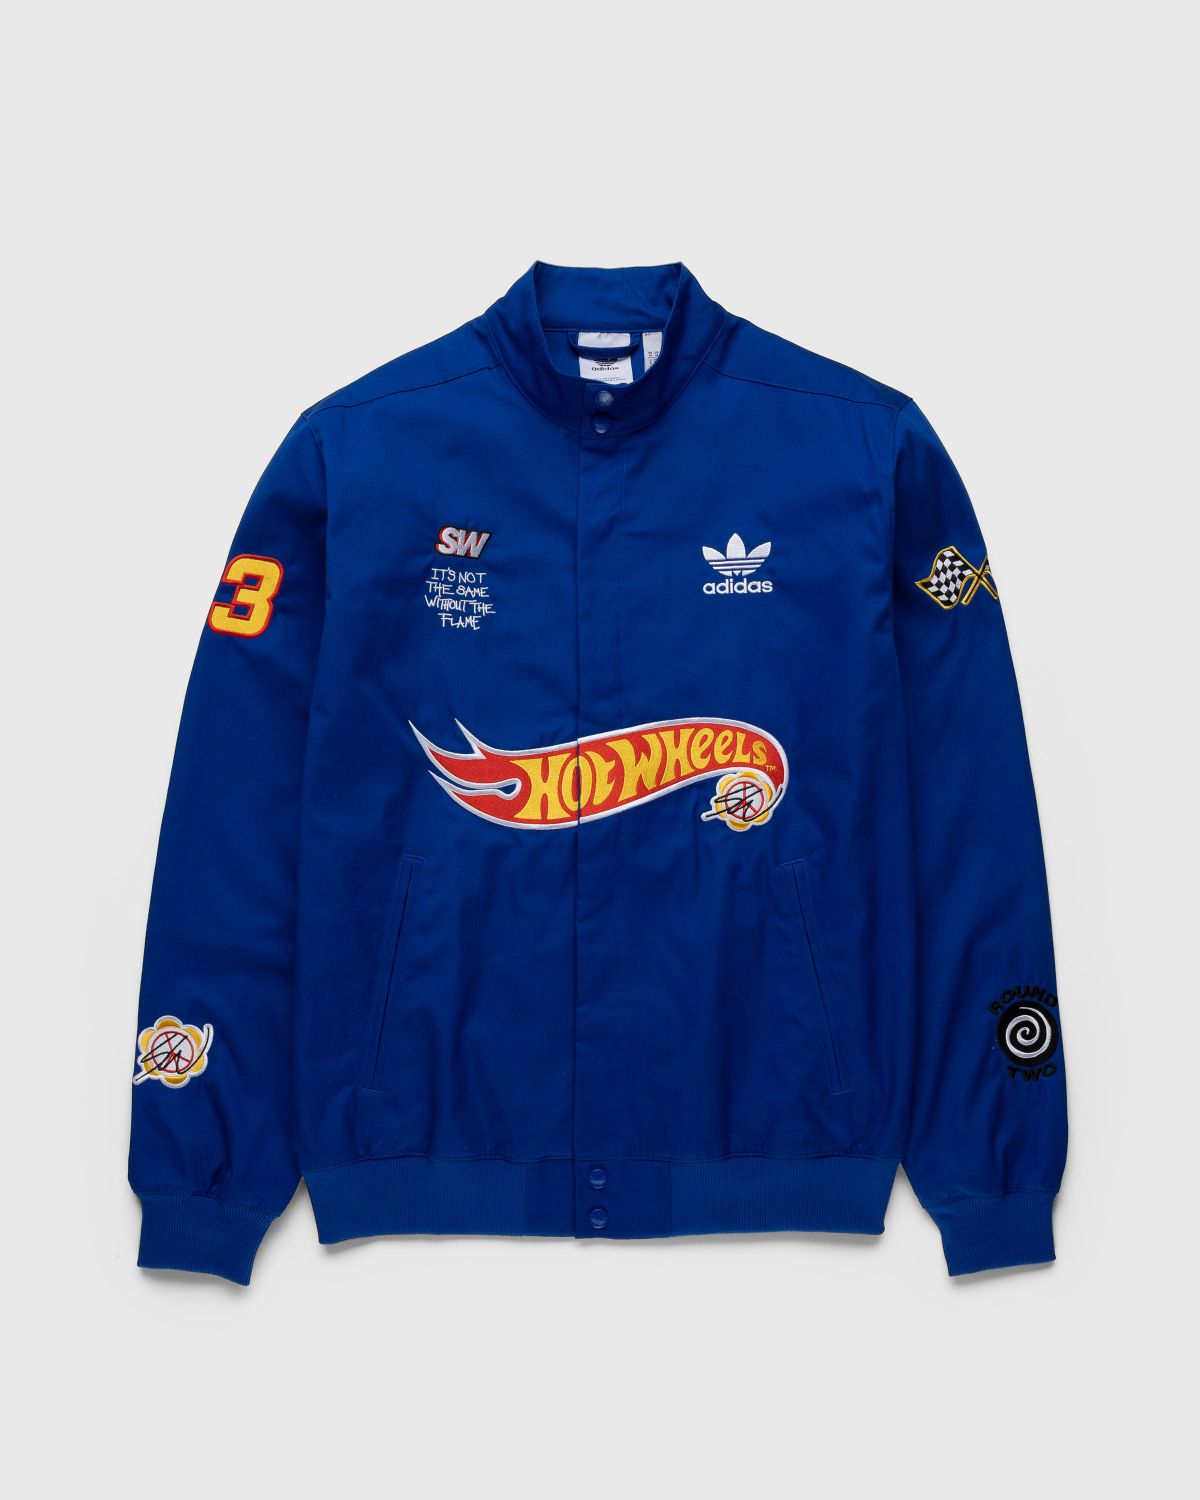 Adidas – Sean Wotherspoon x Hot Wheels Race Jacket Blue - Outerwear - Blue - Image 1